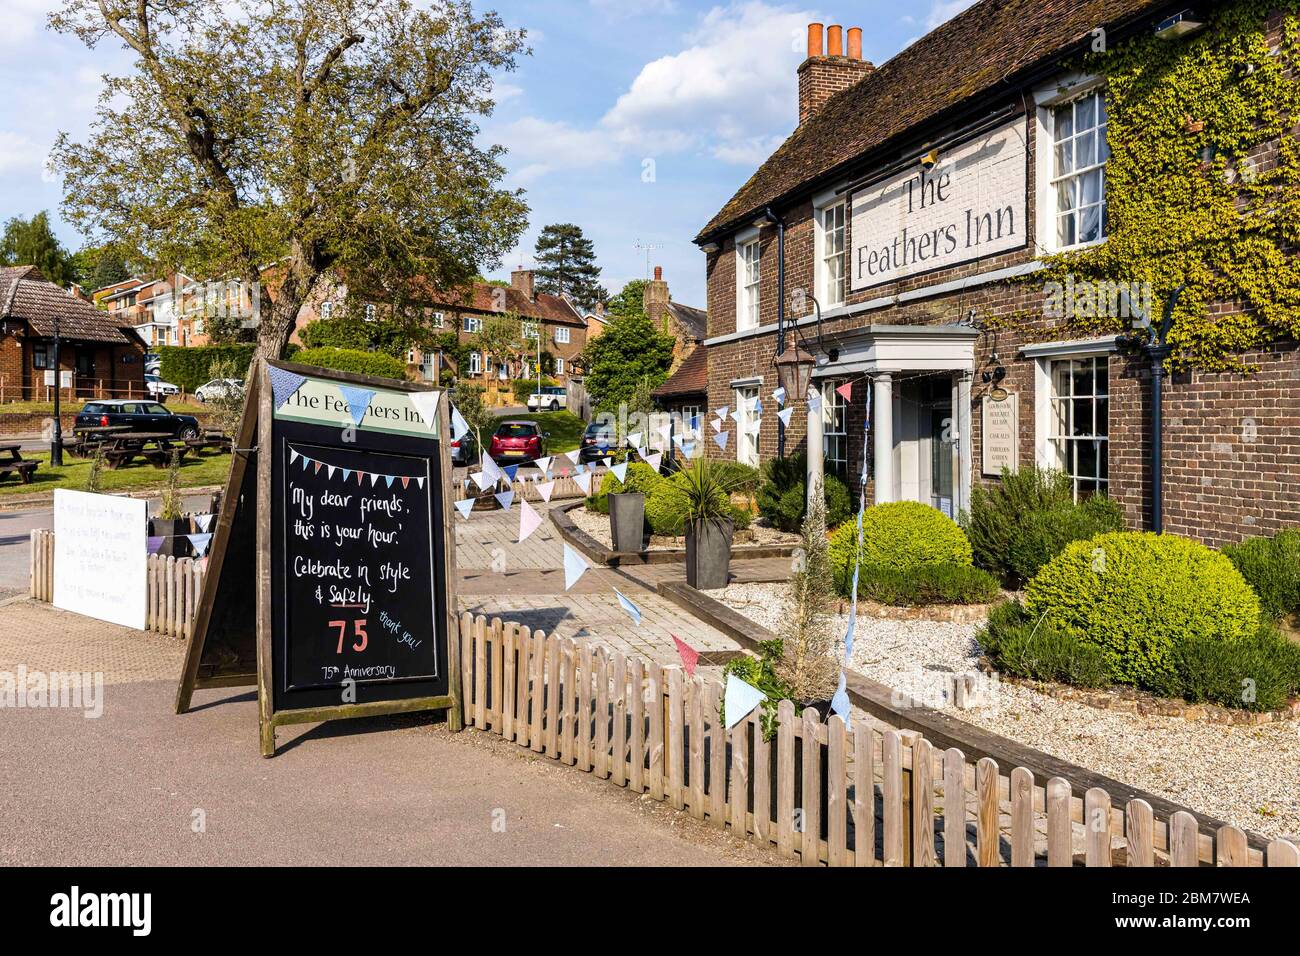 East Hertfordshire, United Kingdom. 07 May, 2020 Pictured: Despite being unable to open due to the COVID-19 restrictions, The Feathers pub in Wadesmill, Hertfordshire has put up bunting and messages to celebrate the VE Day 75th anniversary. Credit: Rich Dyson/Alamy Live News Stock Photo